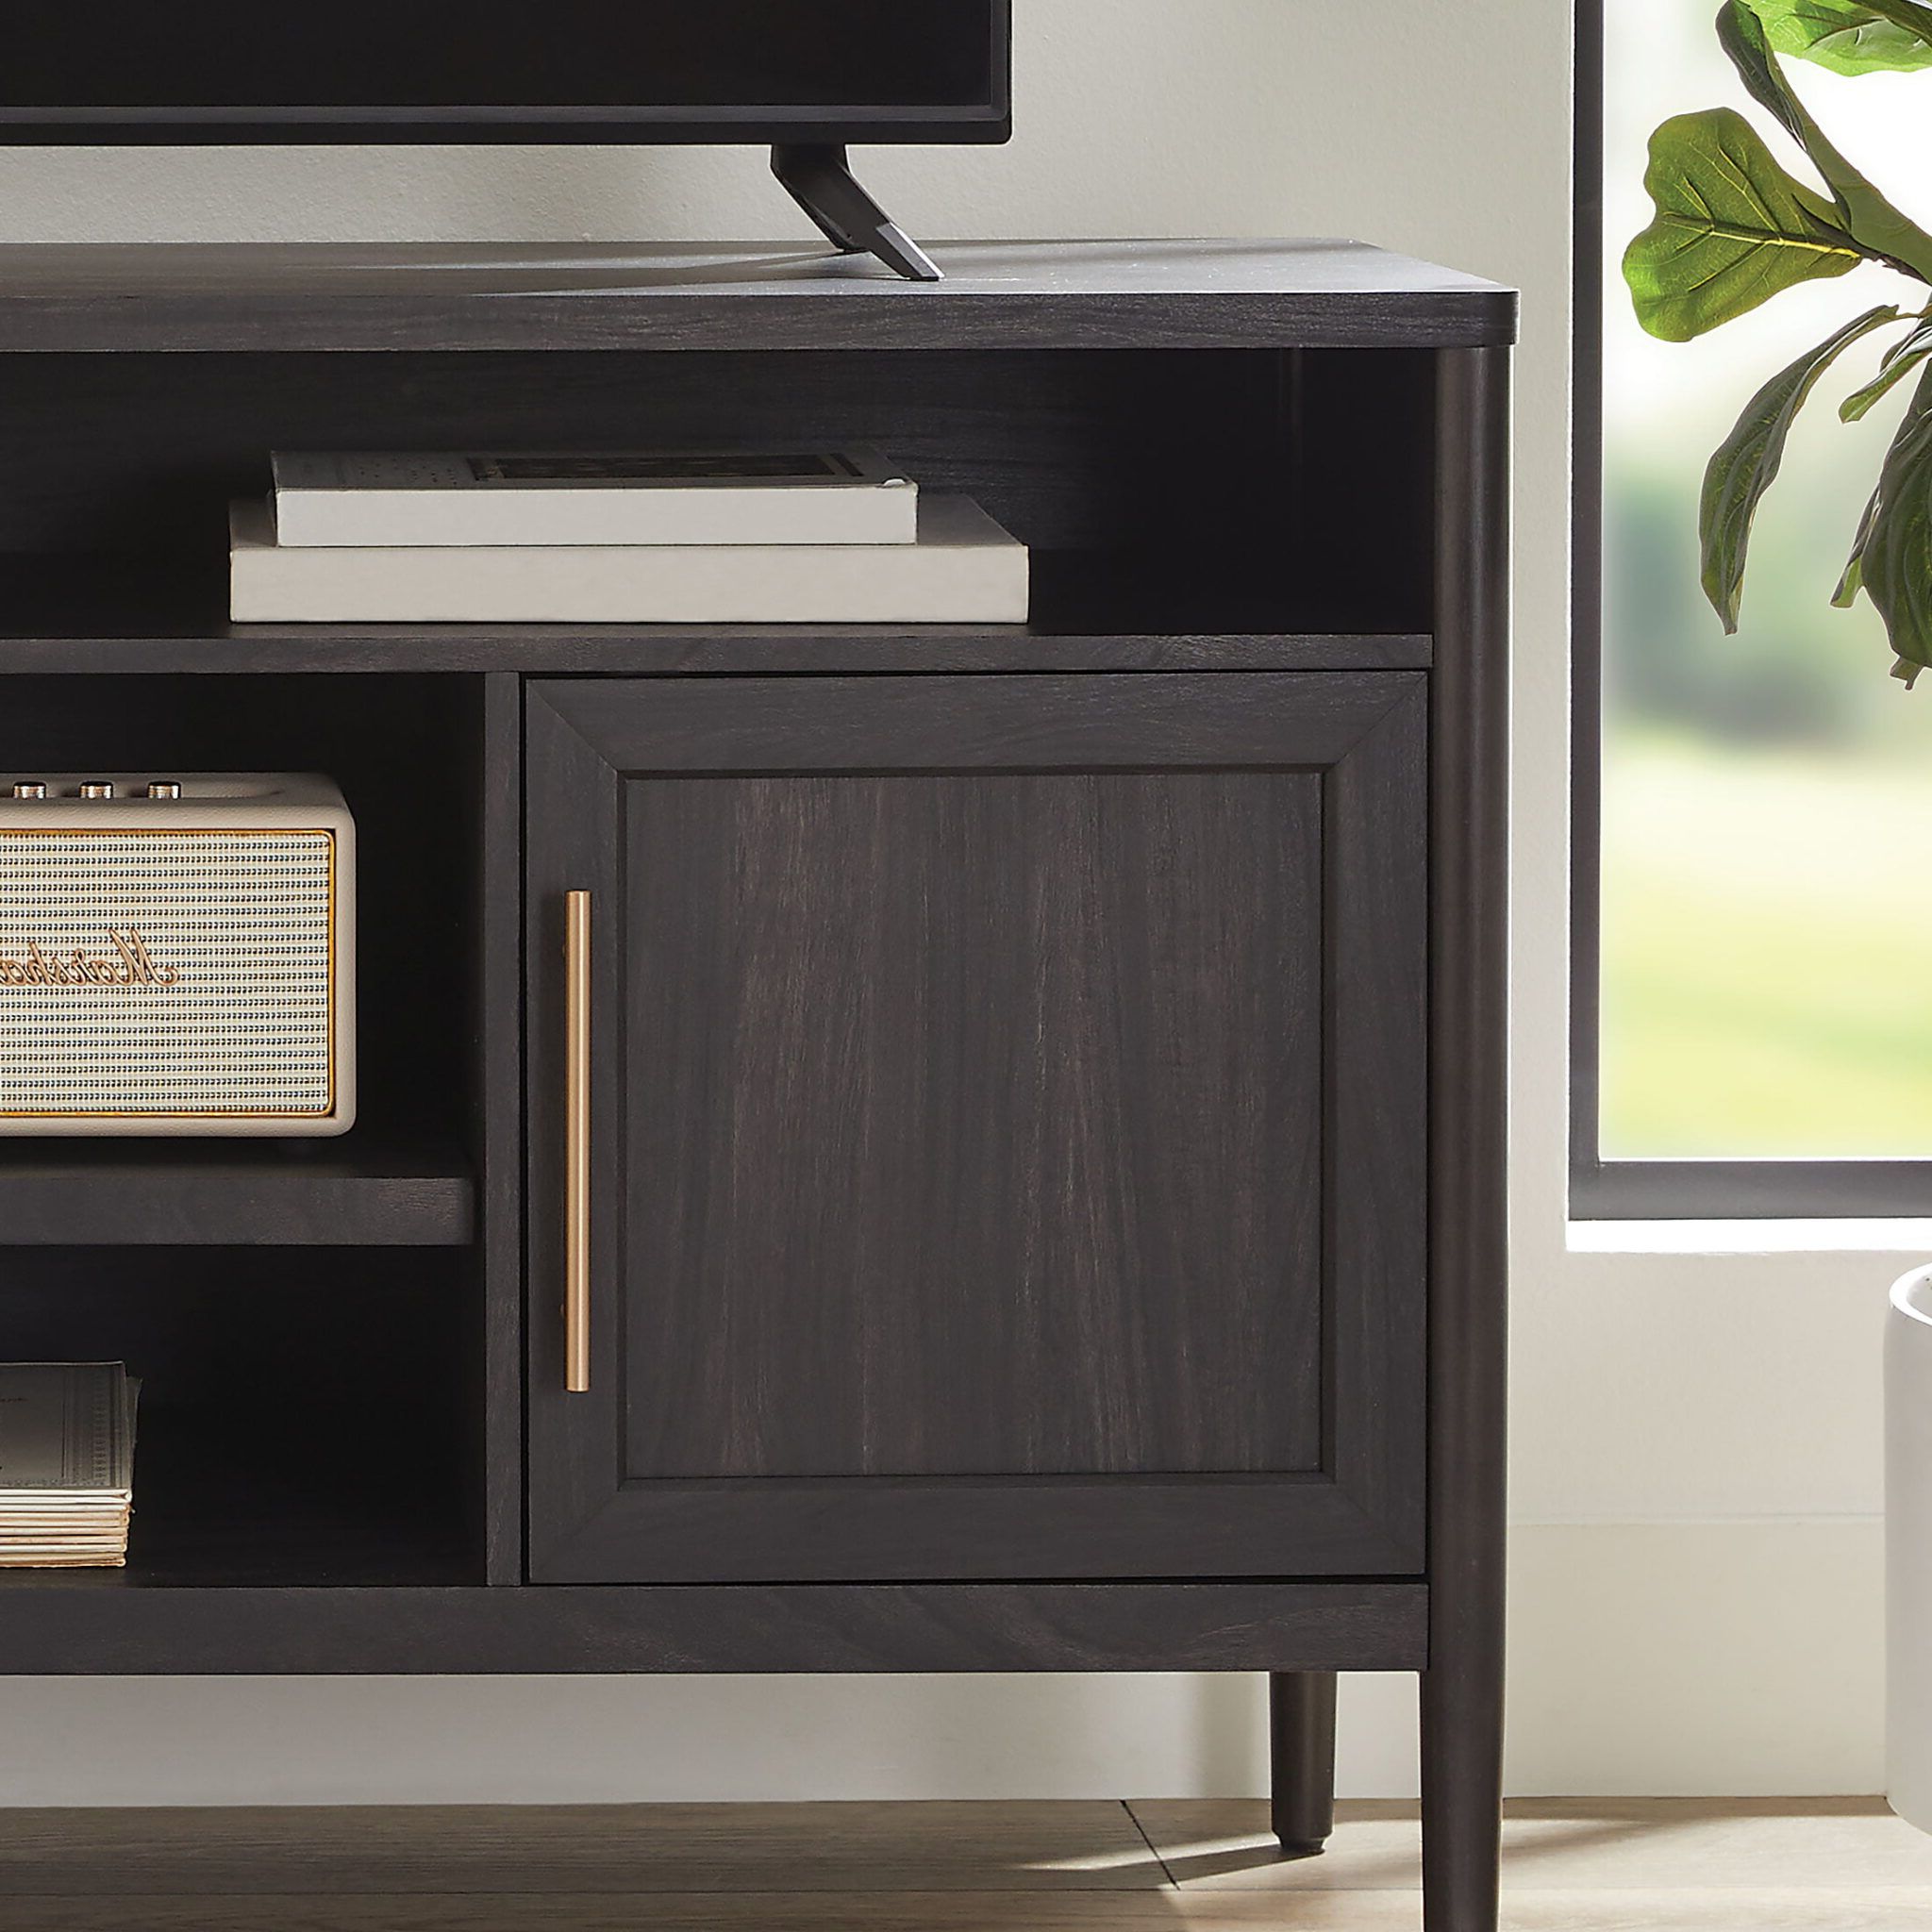 Better Homes & Gardens Oaklee Tv Stand For Tvs Up To 70”, Charcoal For Most Up To Date Oaklee Tv Stands (View 8 of 15)